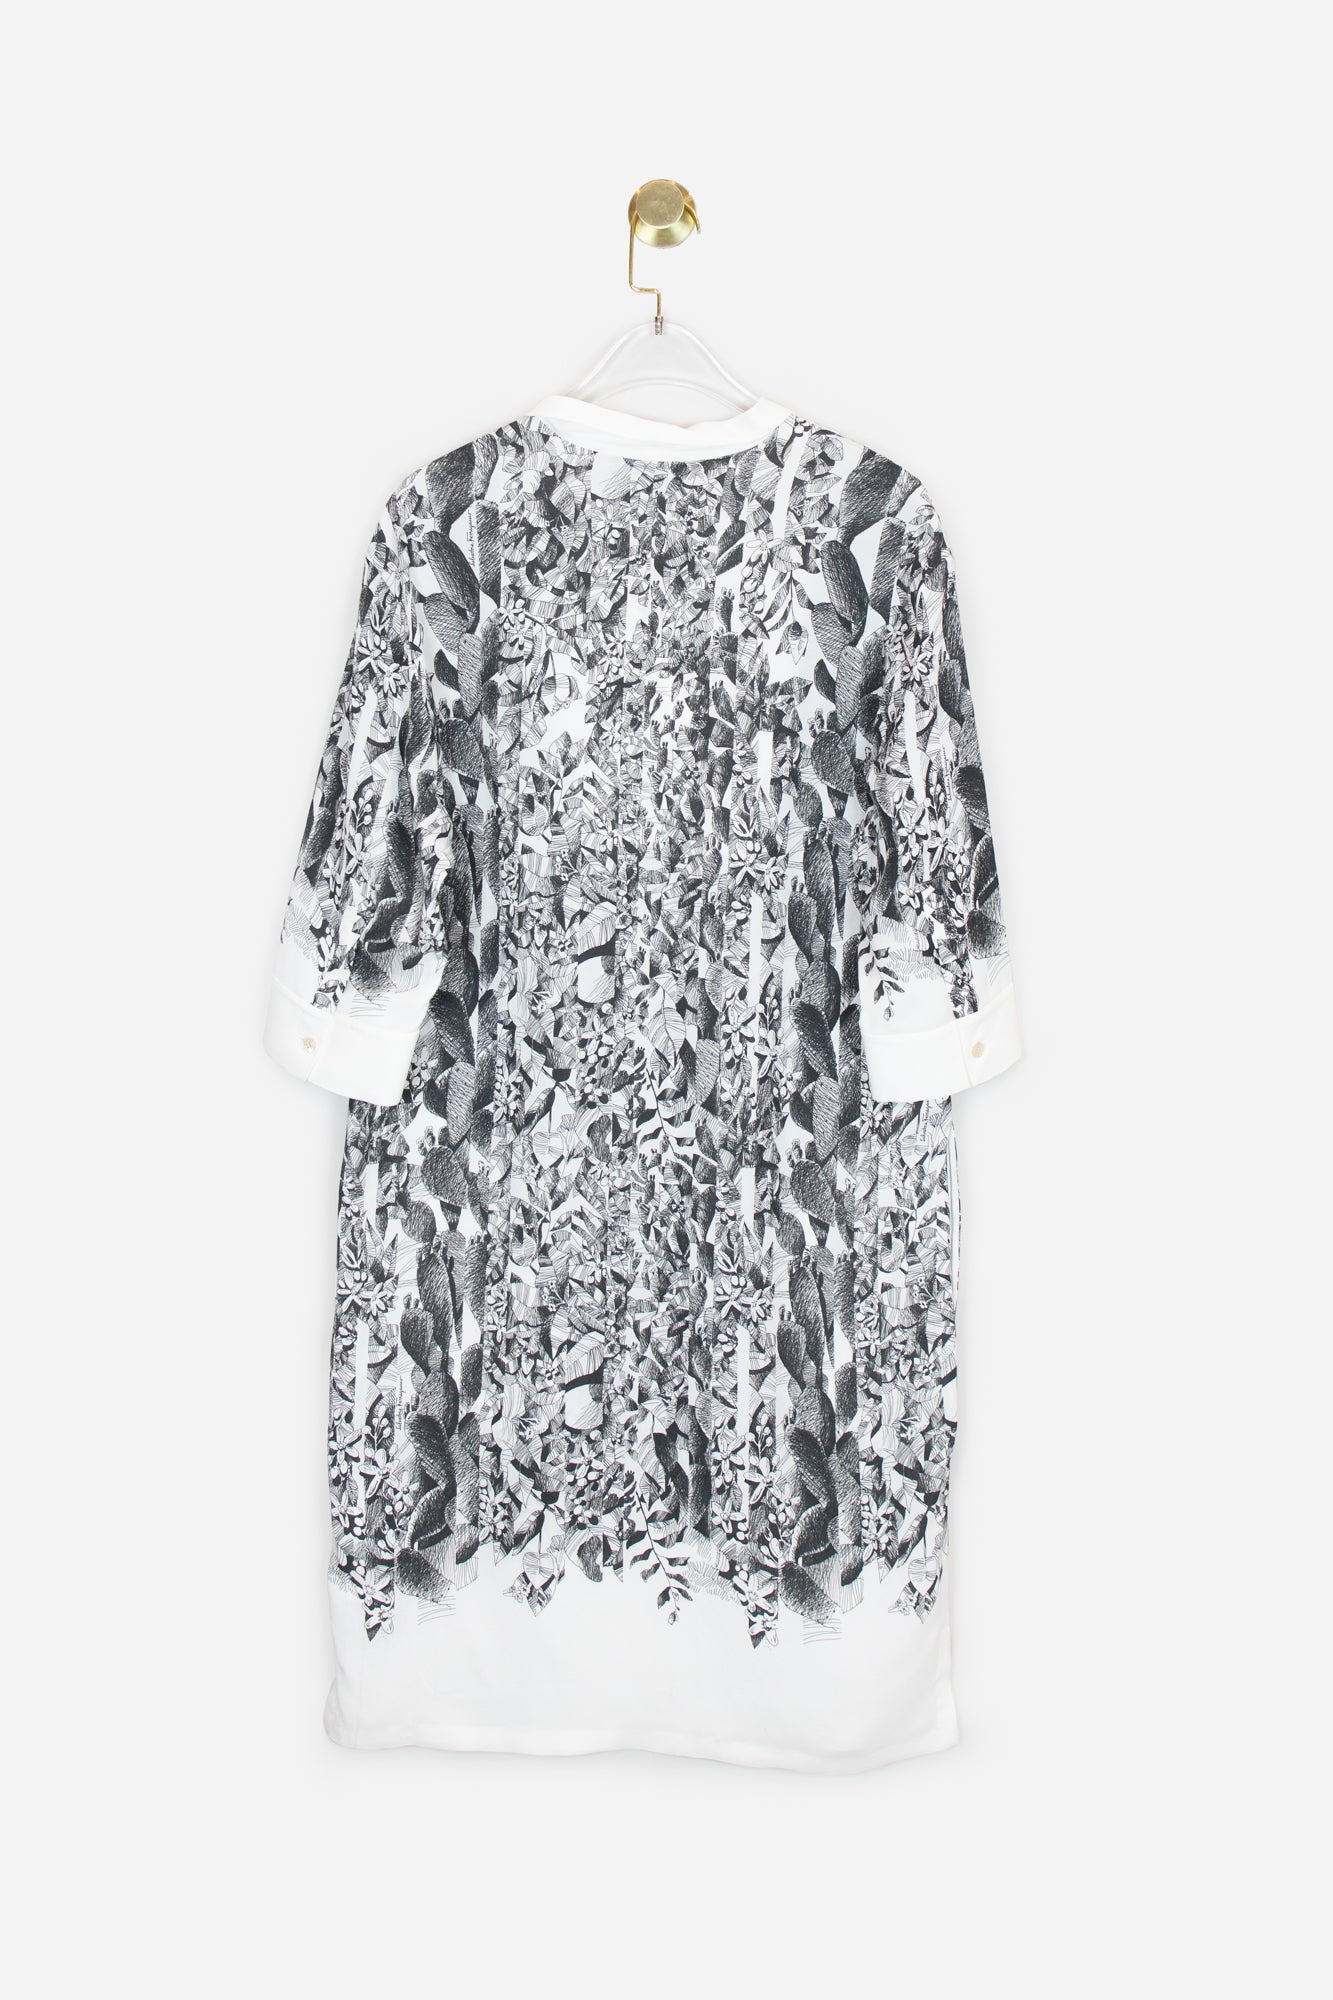 Black and White Printed Midi Dress - So Over It Luxury Consignment